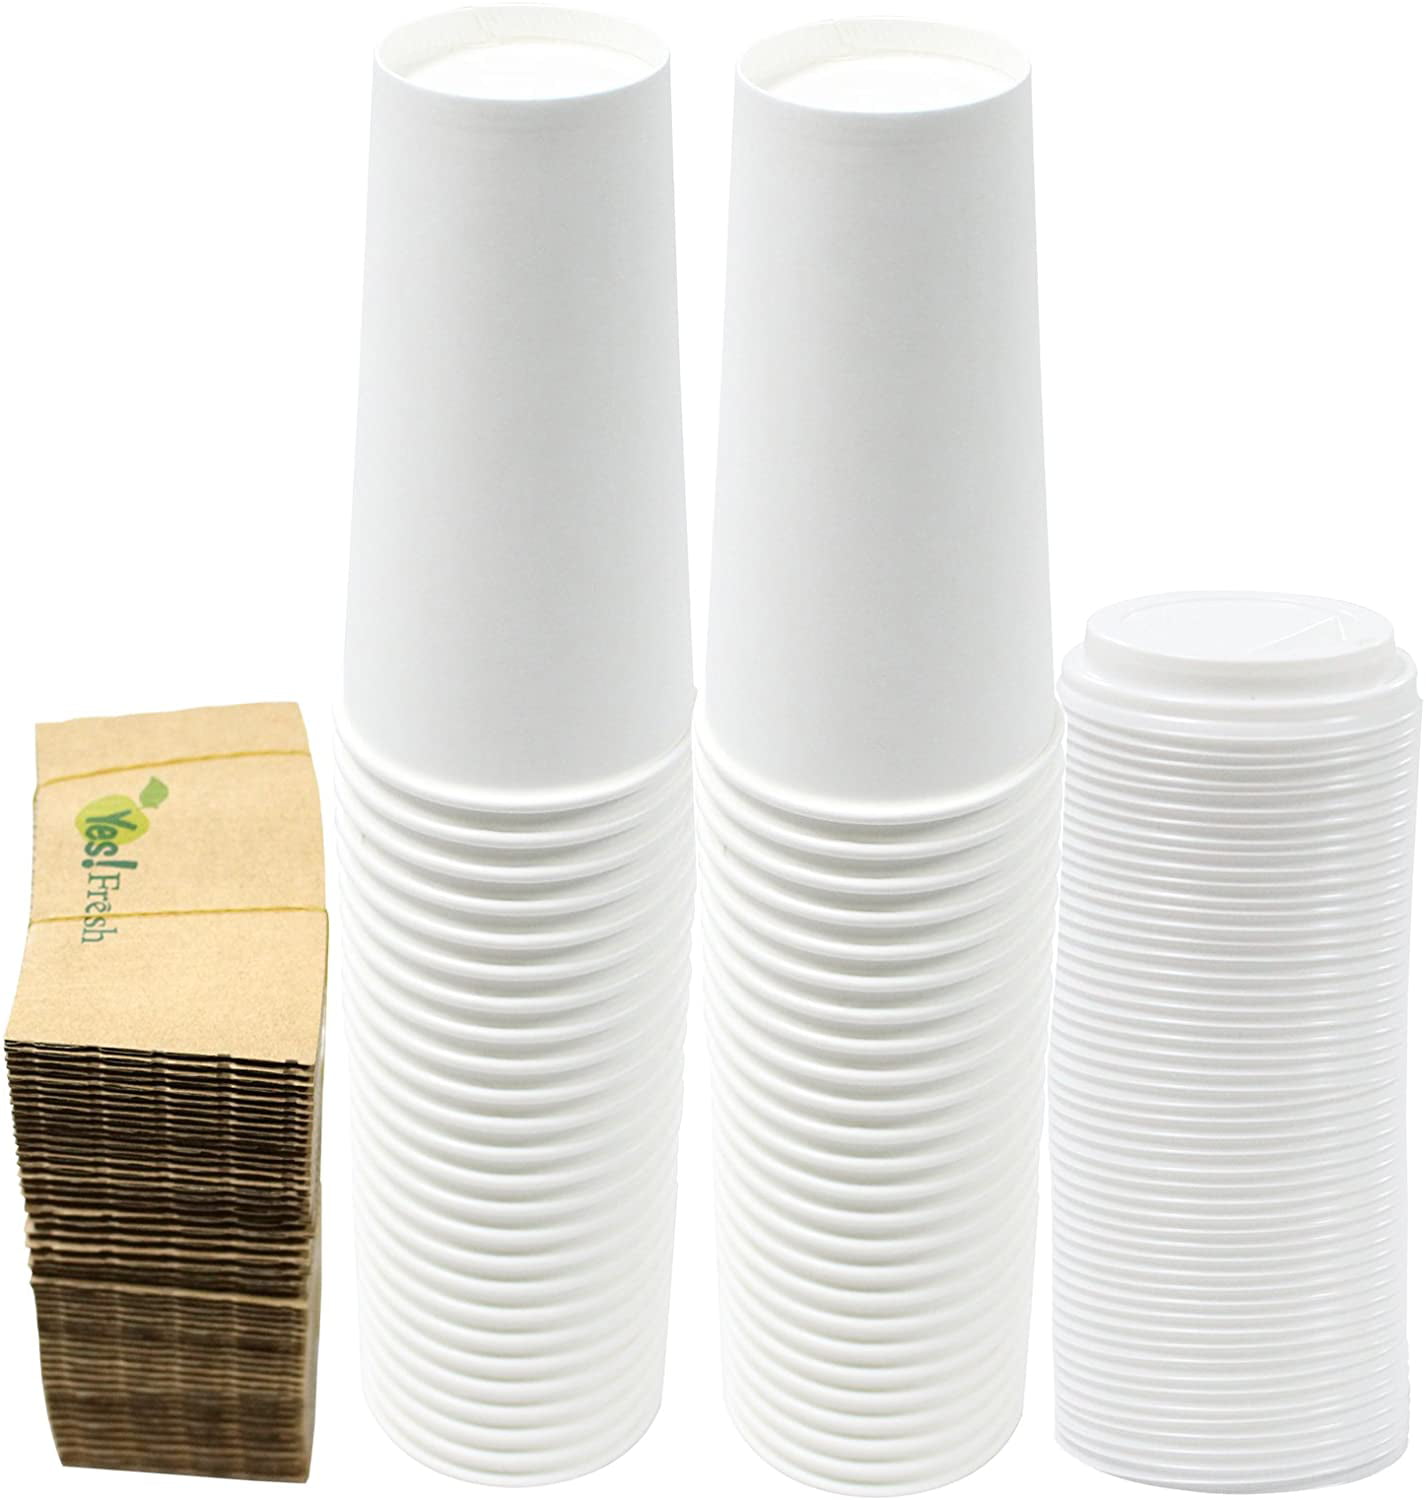 Durable White Paper Hot Coffee Cups with Cappuccino Lids and Protective Corrugated Cup Sleeves 16 Ounce Qty of 50 